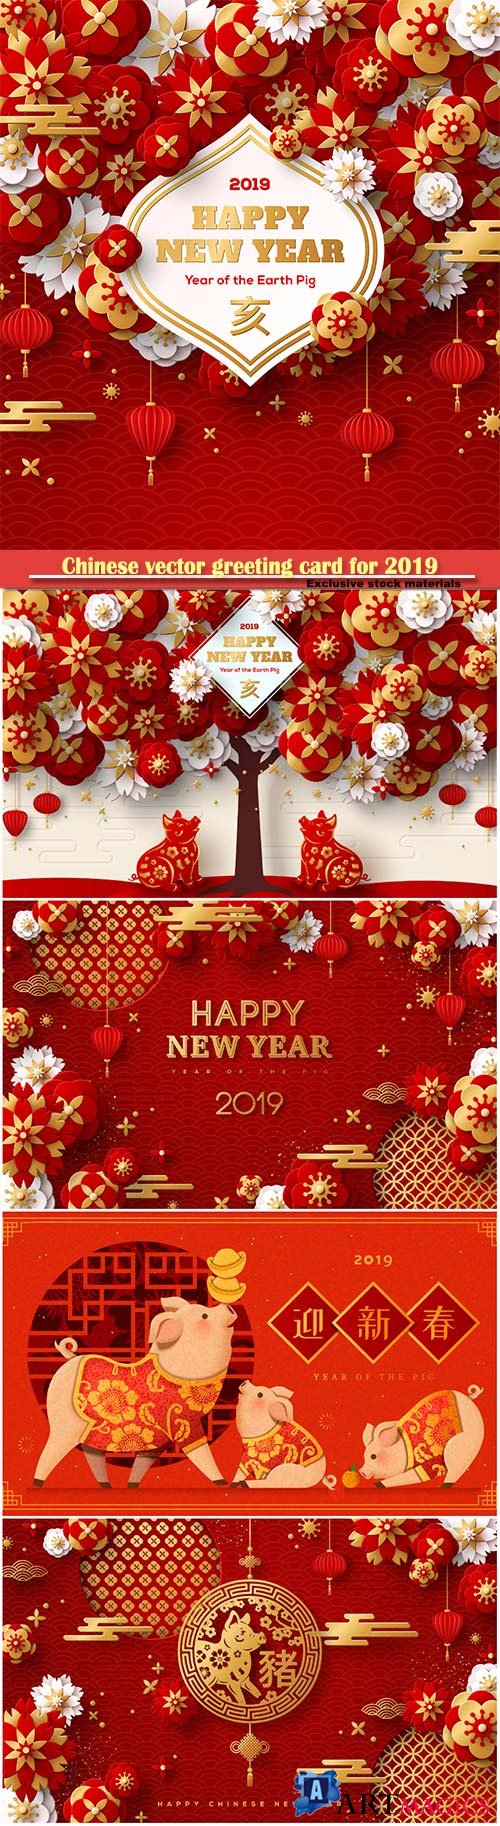 Chinese vector greeting card for 2019 New Year, sign pig